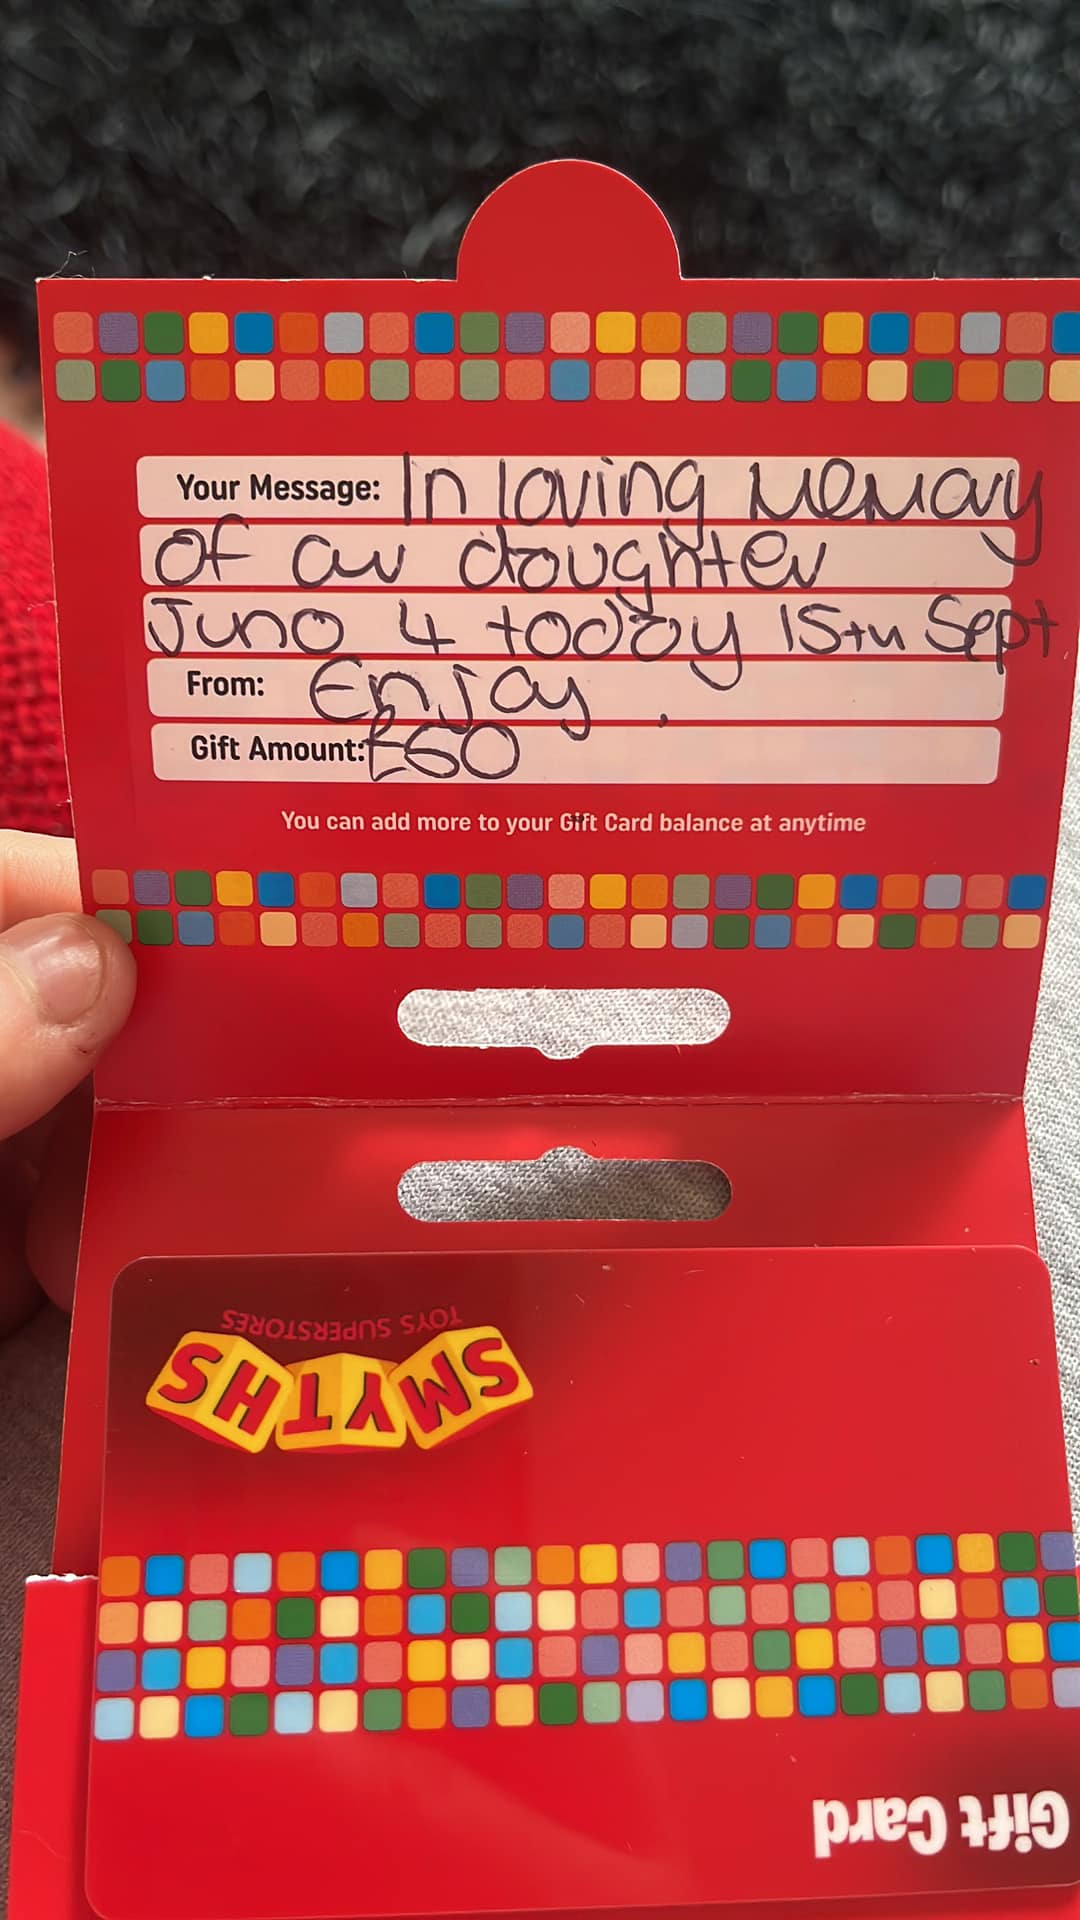 gift card from smyths toys superstores with a message that says: "in loving memory of our daughter juno 4 today 15th sept. Enjoy" and gift amout: 50 euros.